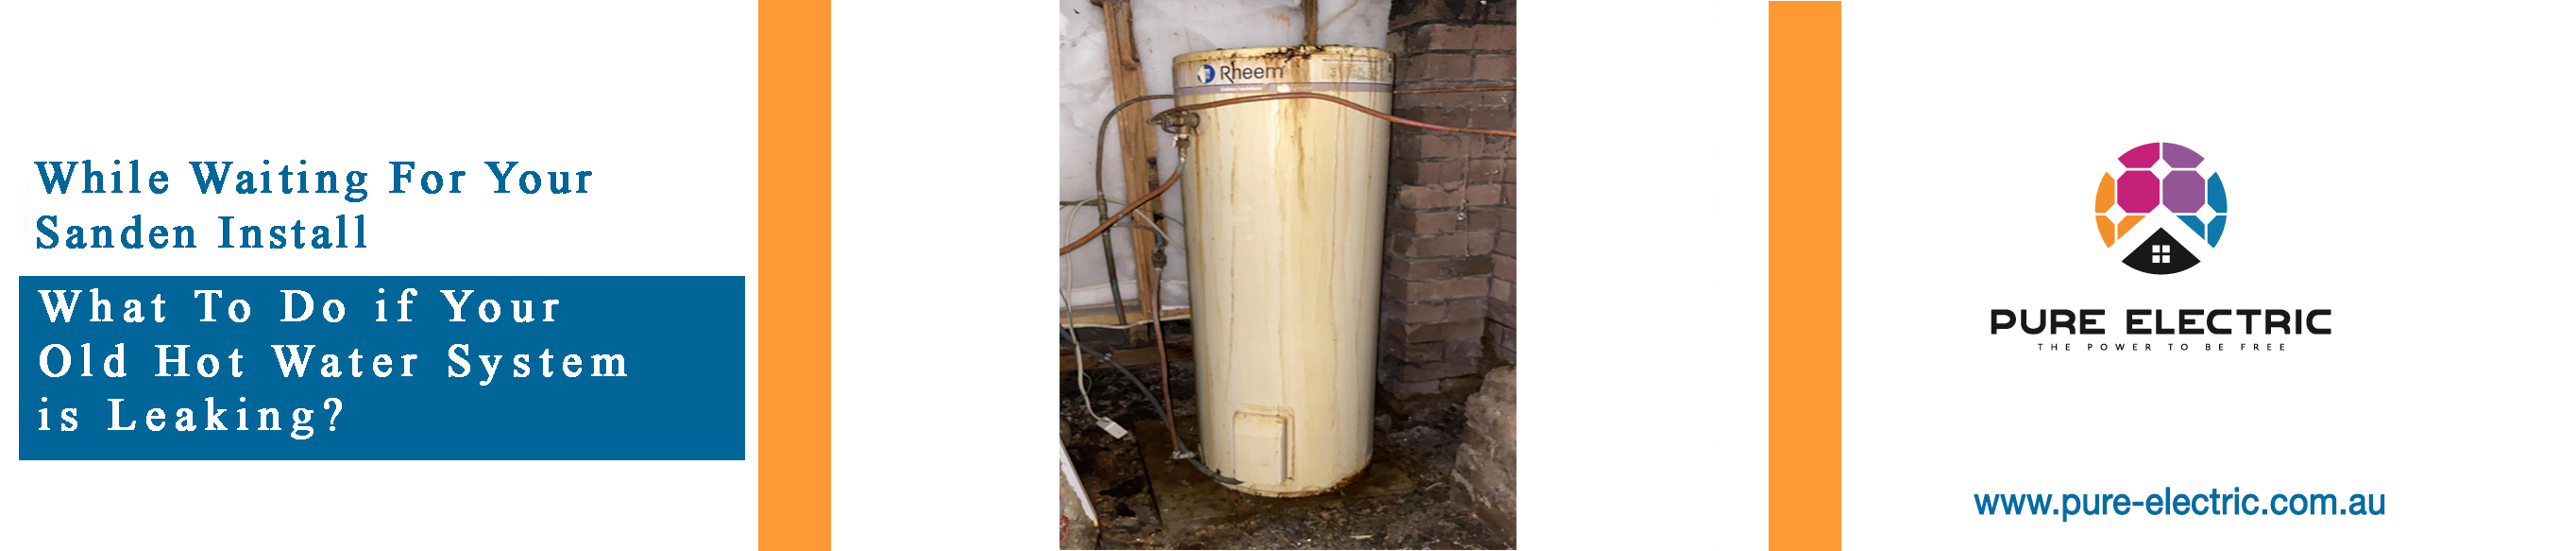 While Waiting For Your Sanden Install - What To Do if Your Old Hot Water System is Leaking?